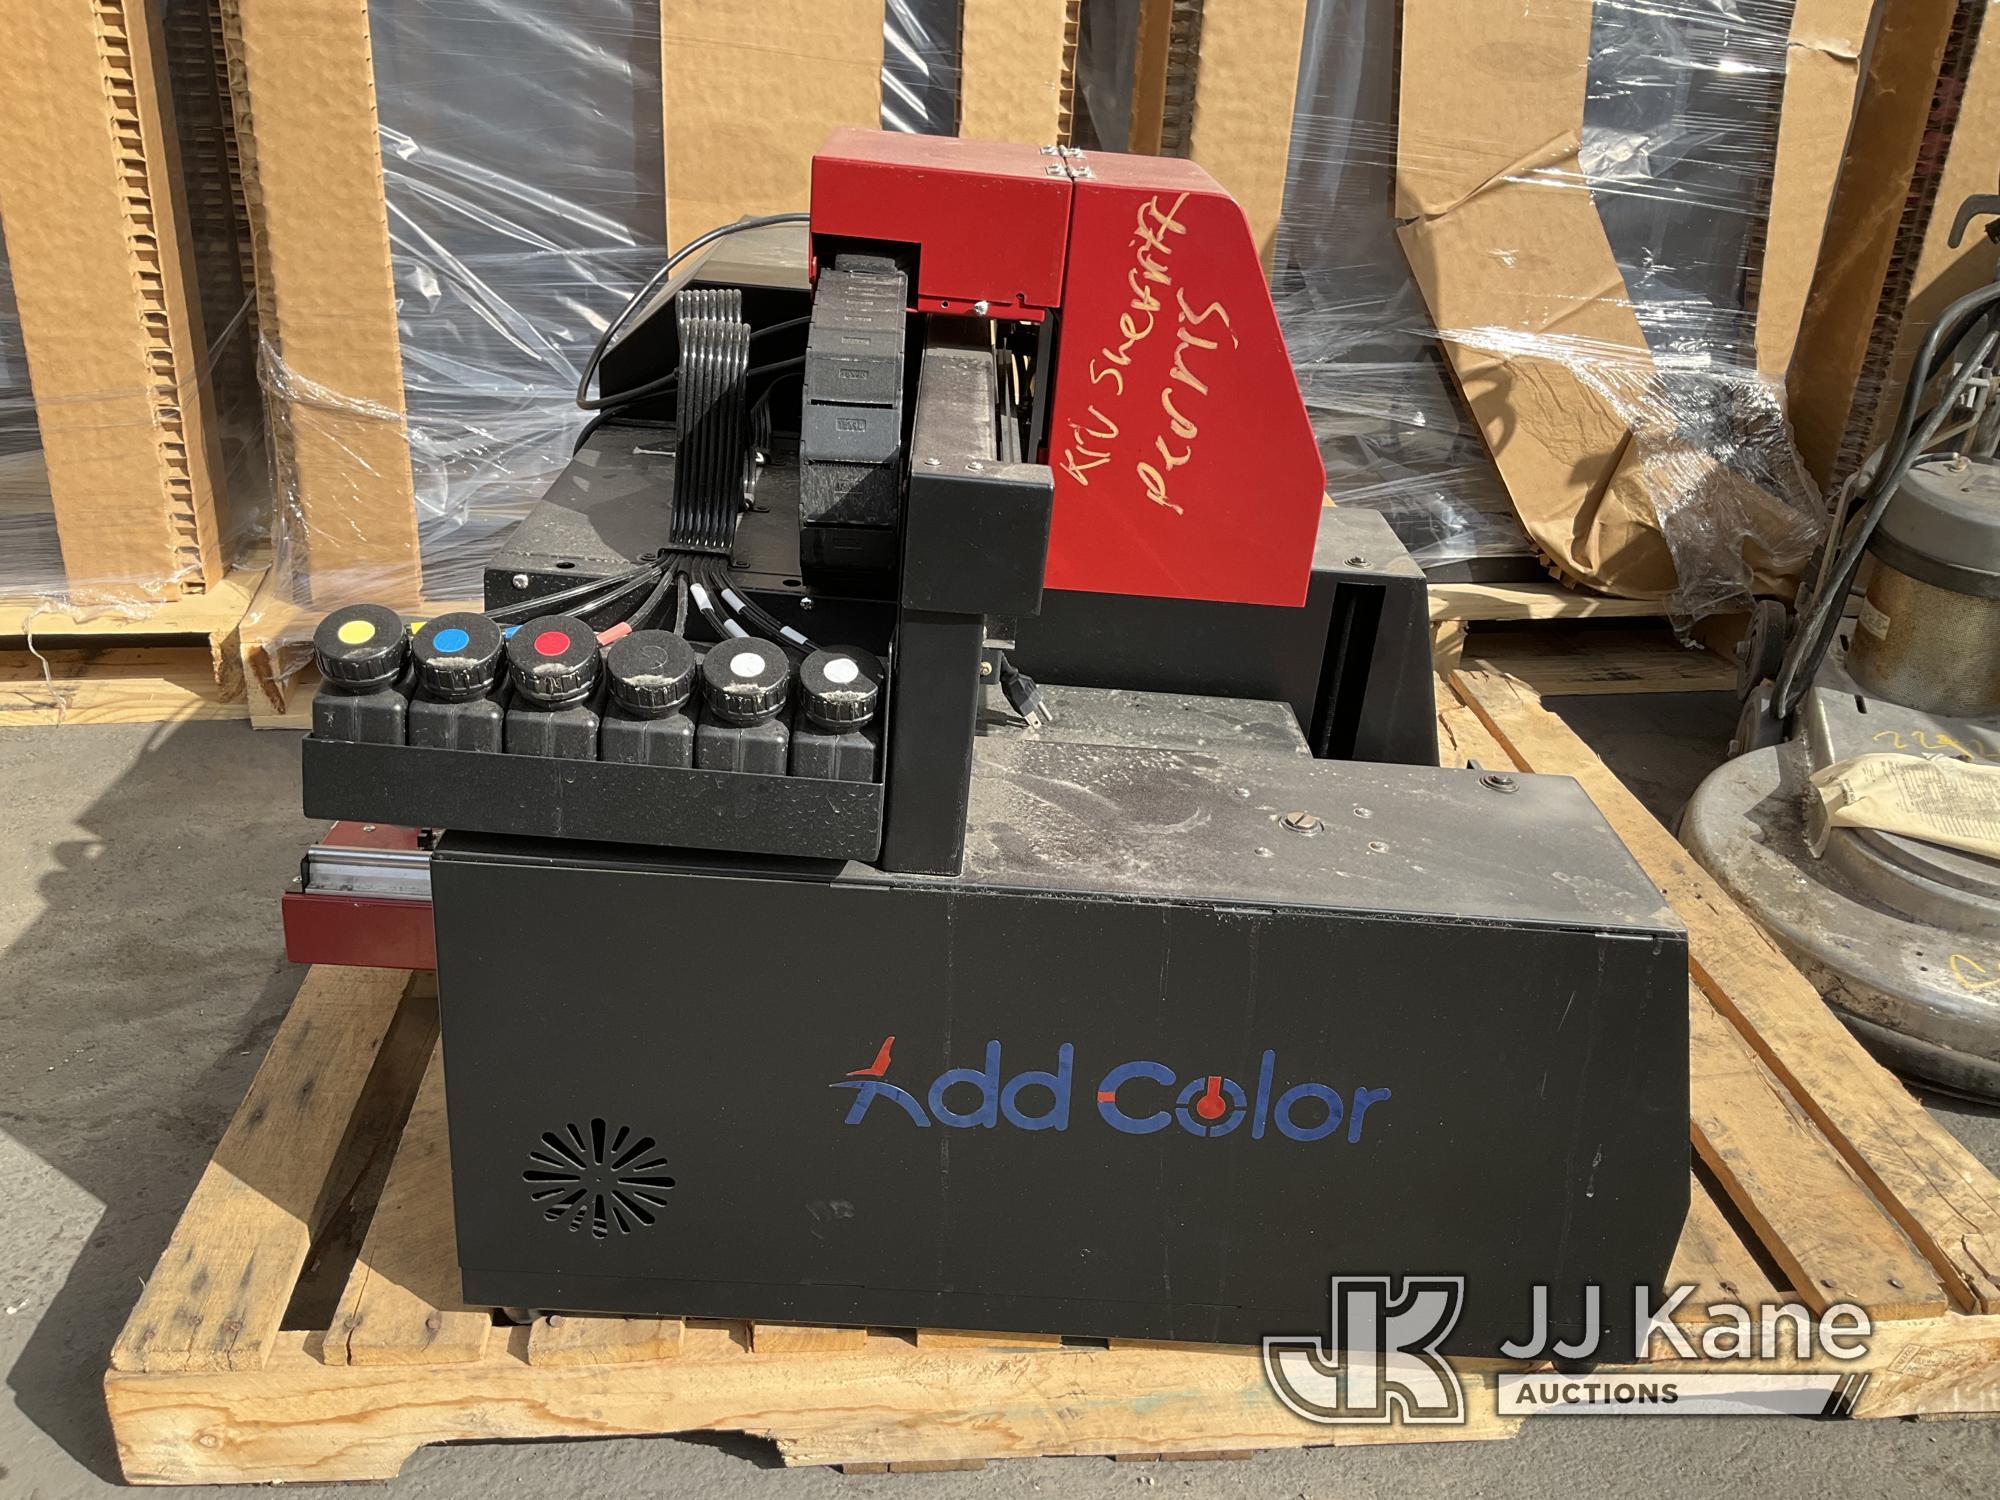 (Jurupa Valley, CA) Add Color 3D Printer (Used) NOTE: This unit is being sold AS IS/WHERE IS via Tim